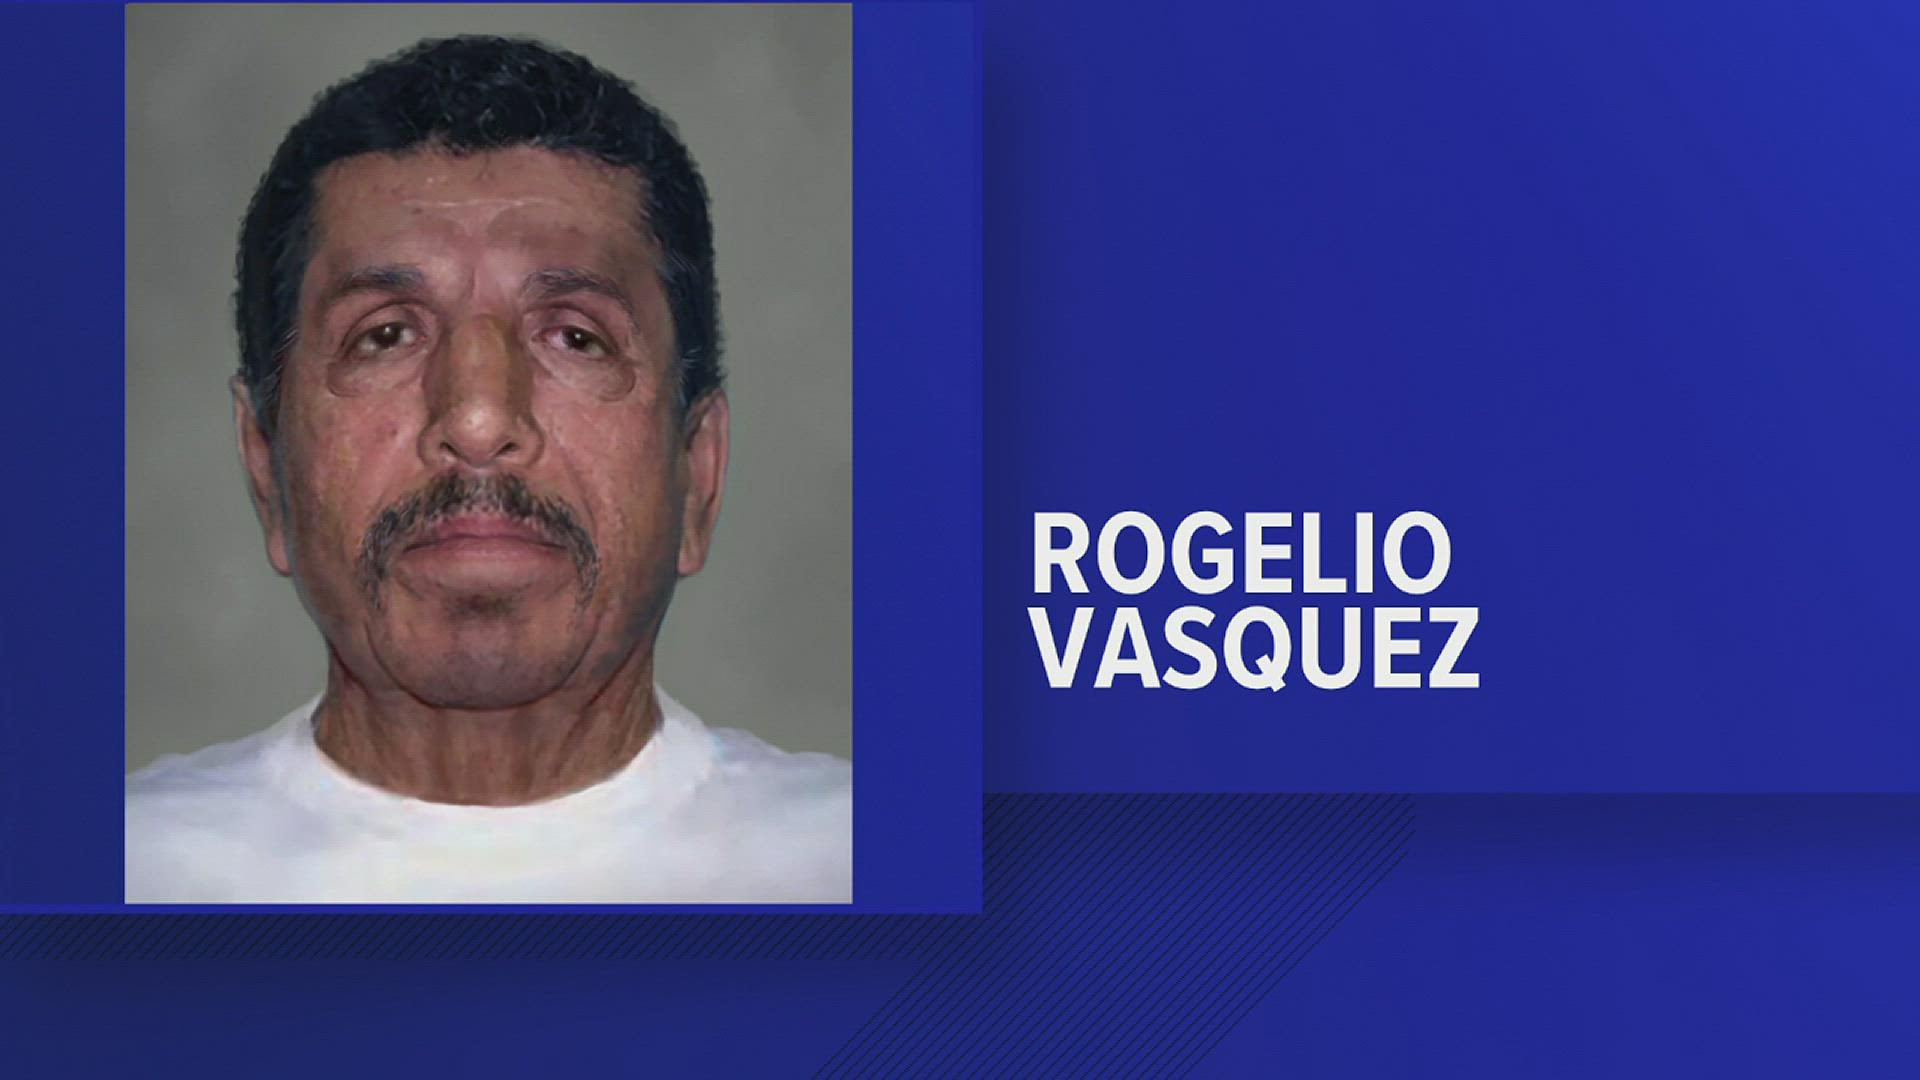 Rogelio Guerra Vasquez is charged with murder in connection with the death of his wife Sugie Vasquez.